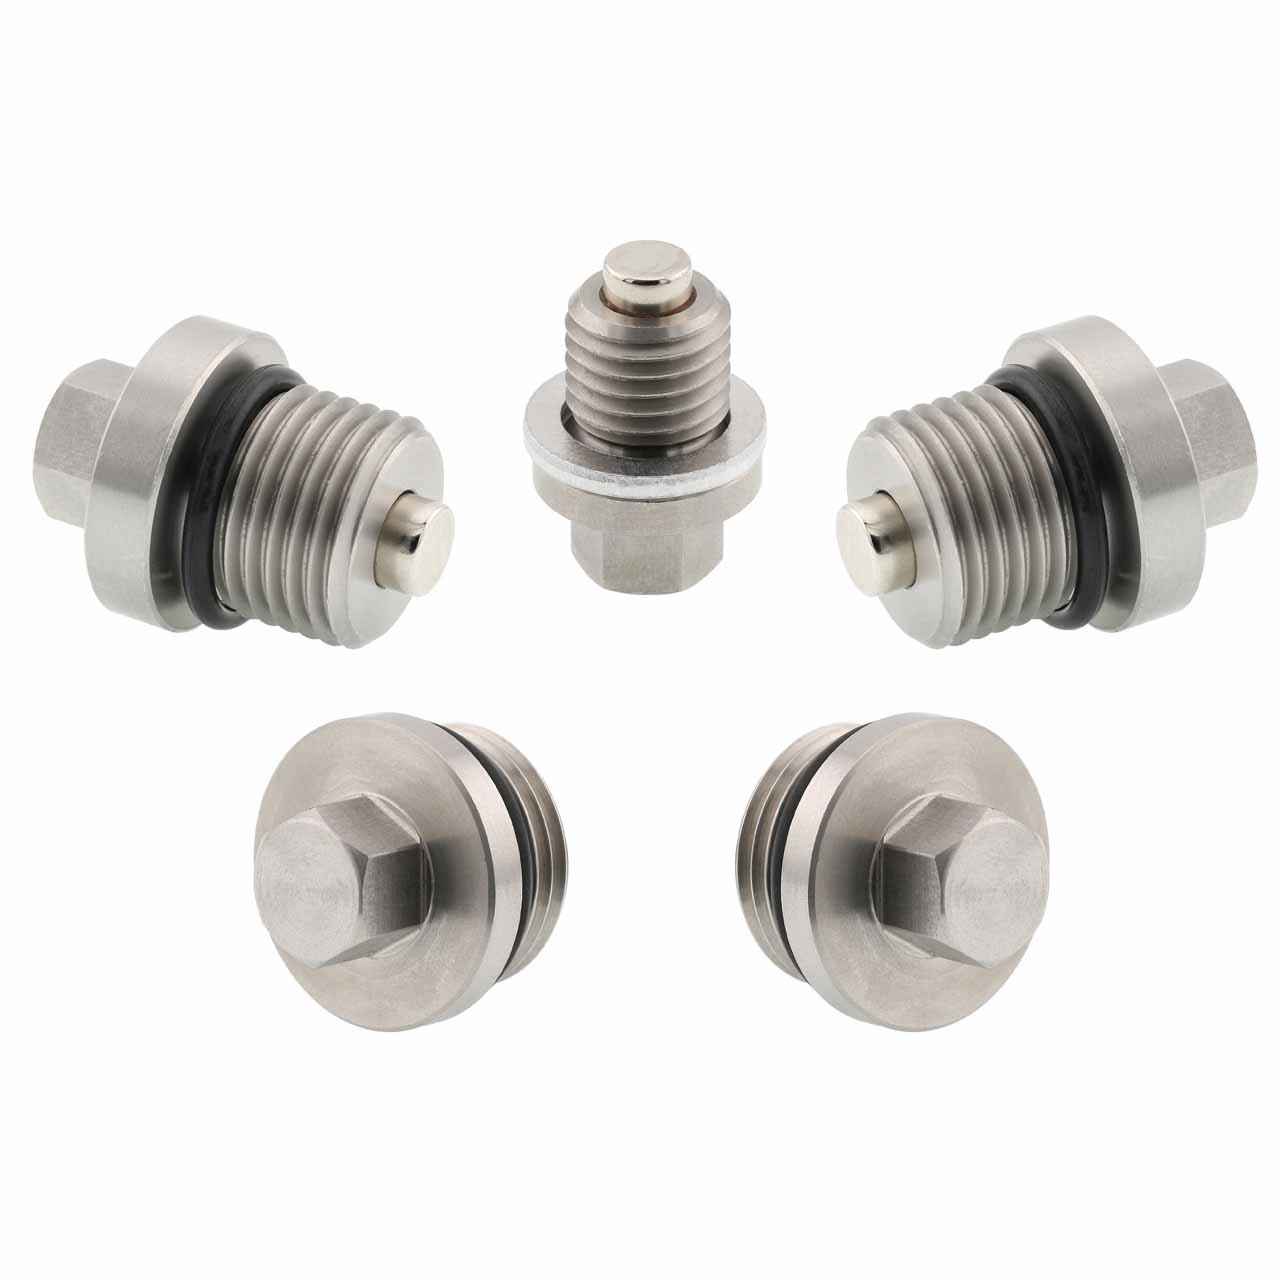 Polaris RZR S 800 EPS Magnetic Oil Drain Plug Kit - 2014 - Engine, Transmission, Differential - Made In USA